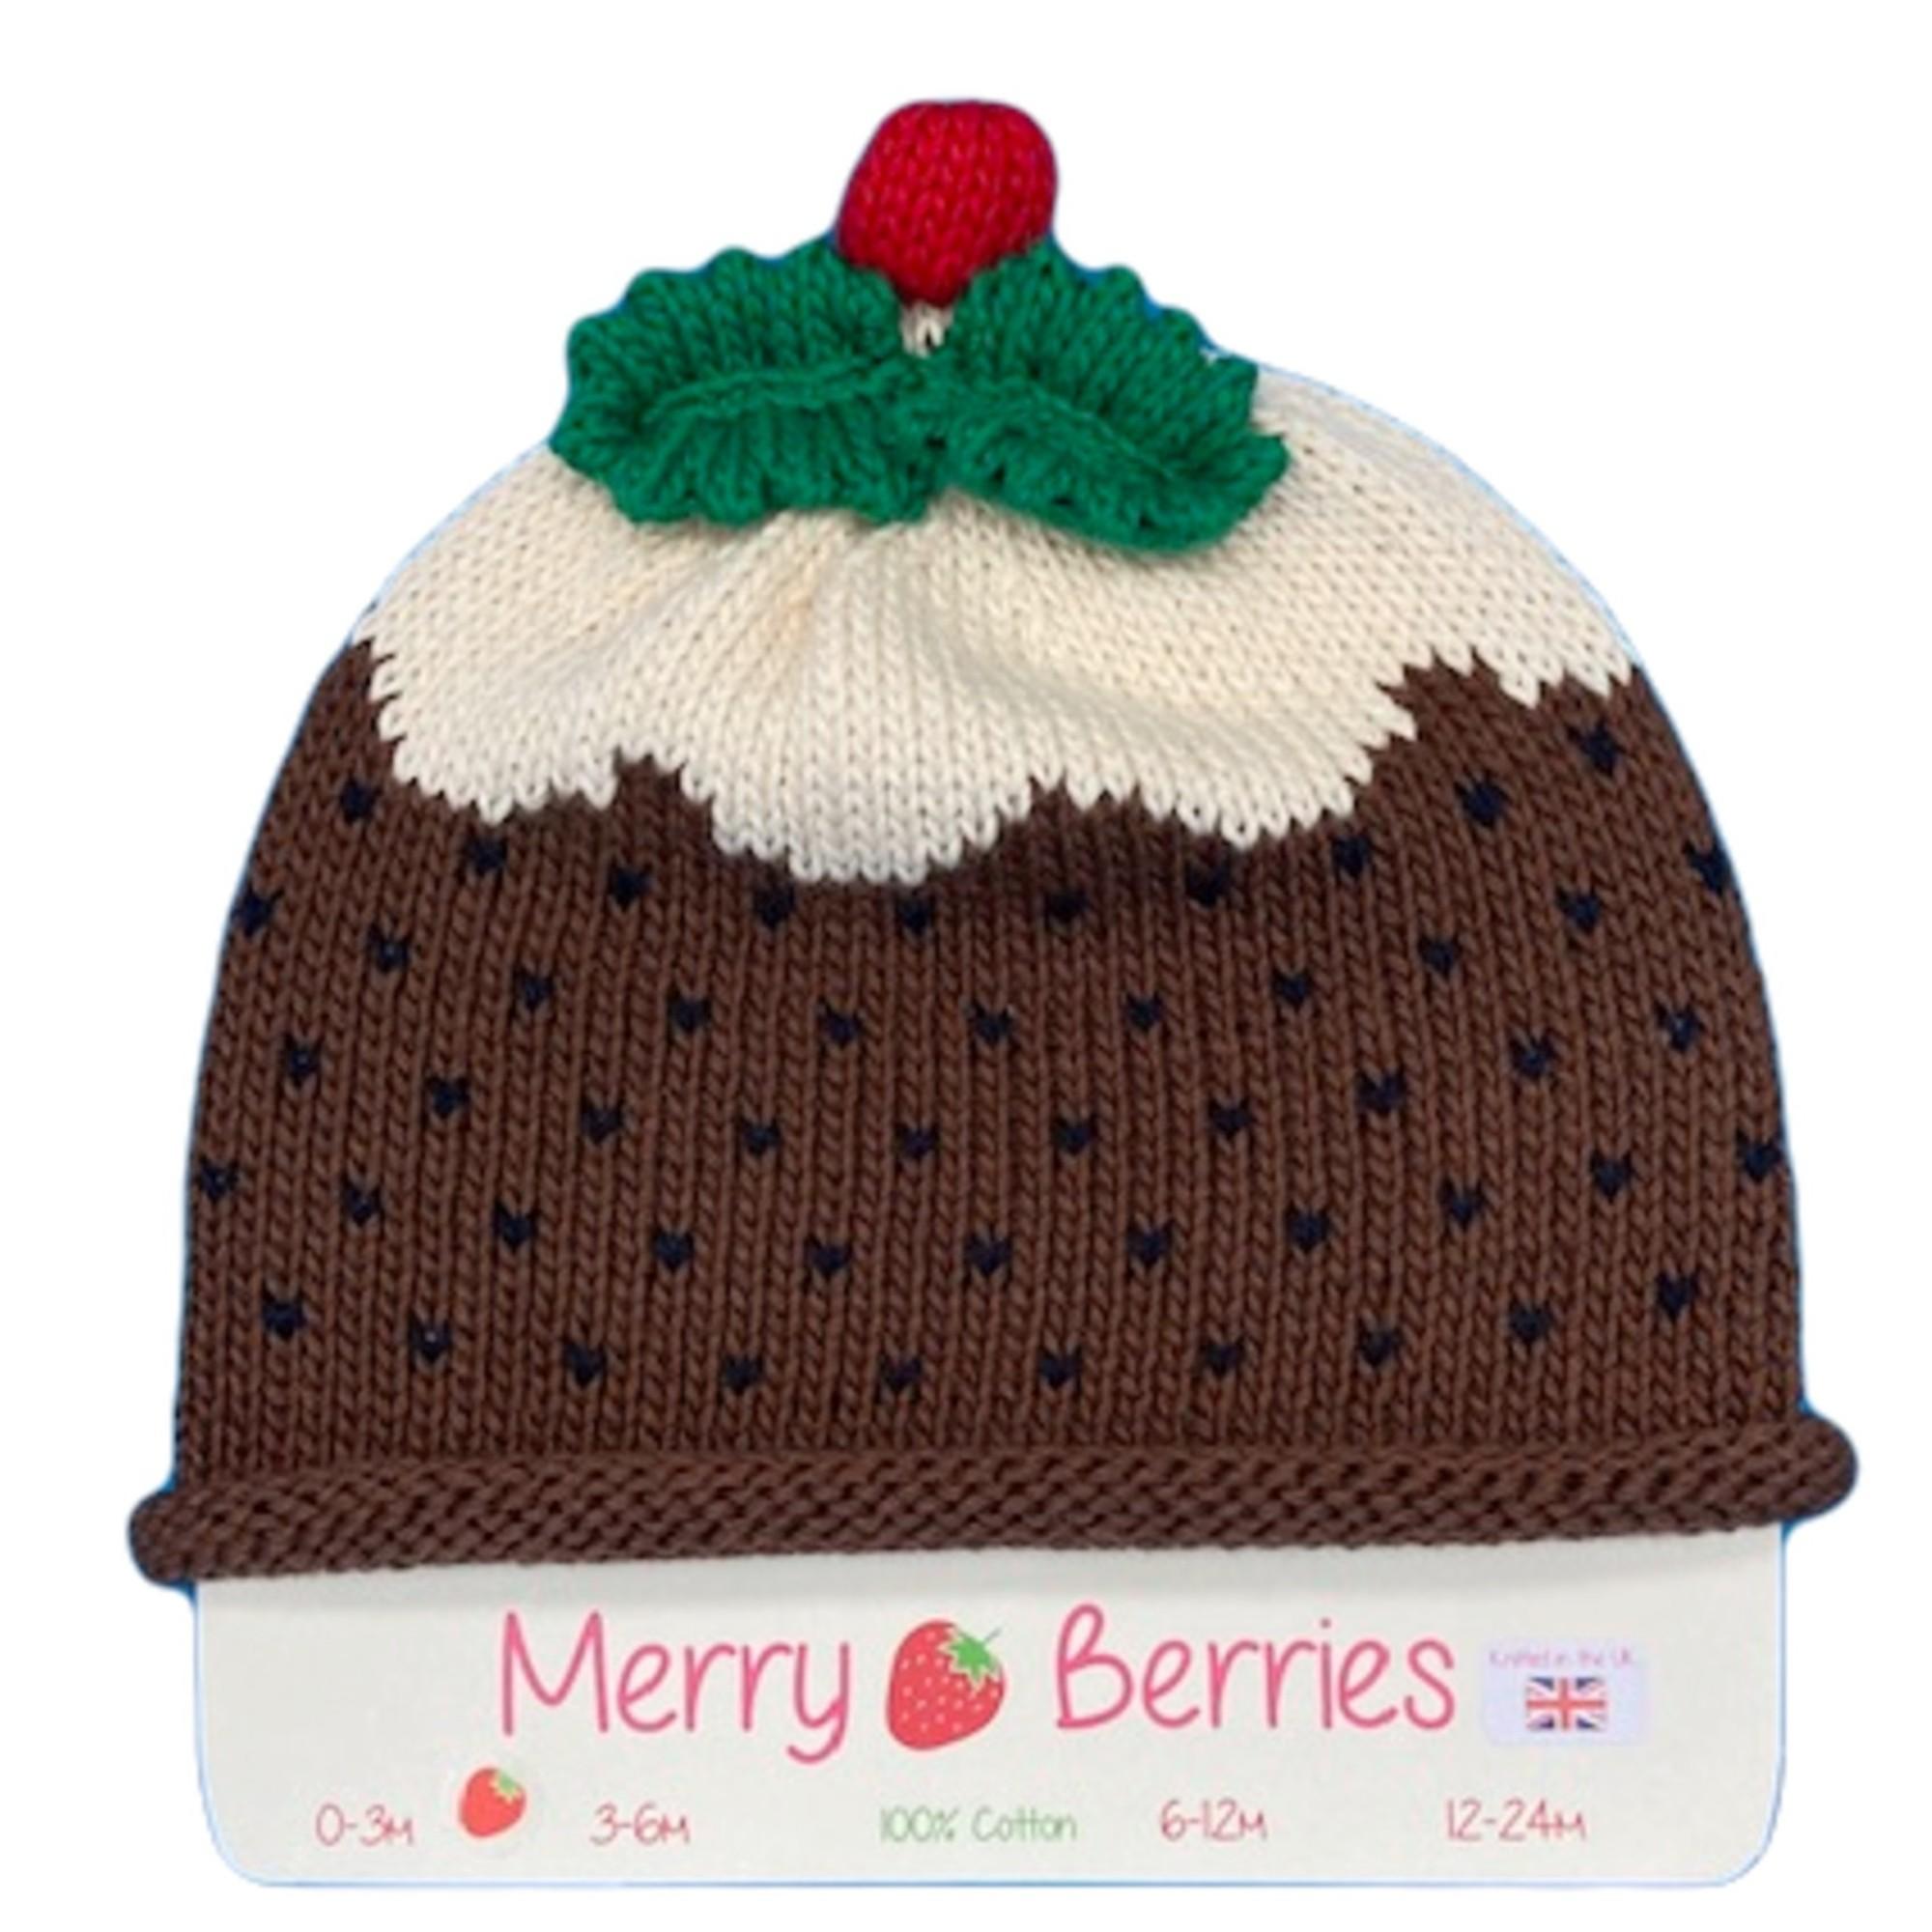 Merry Berries - Christmas Pudding Knitted baby Hat-0-24mths-Cotton